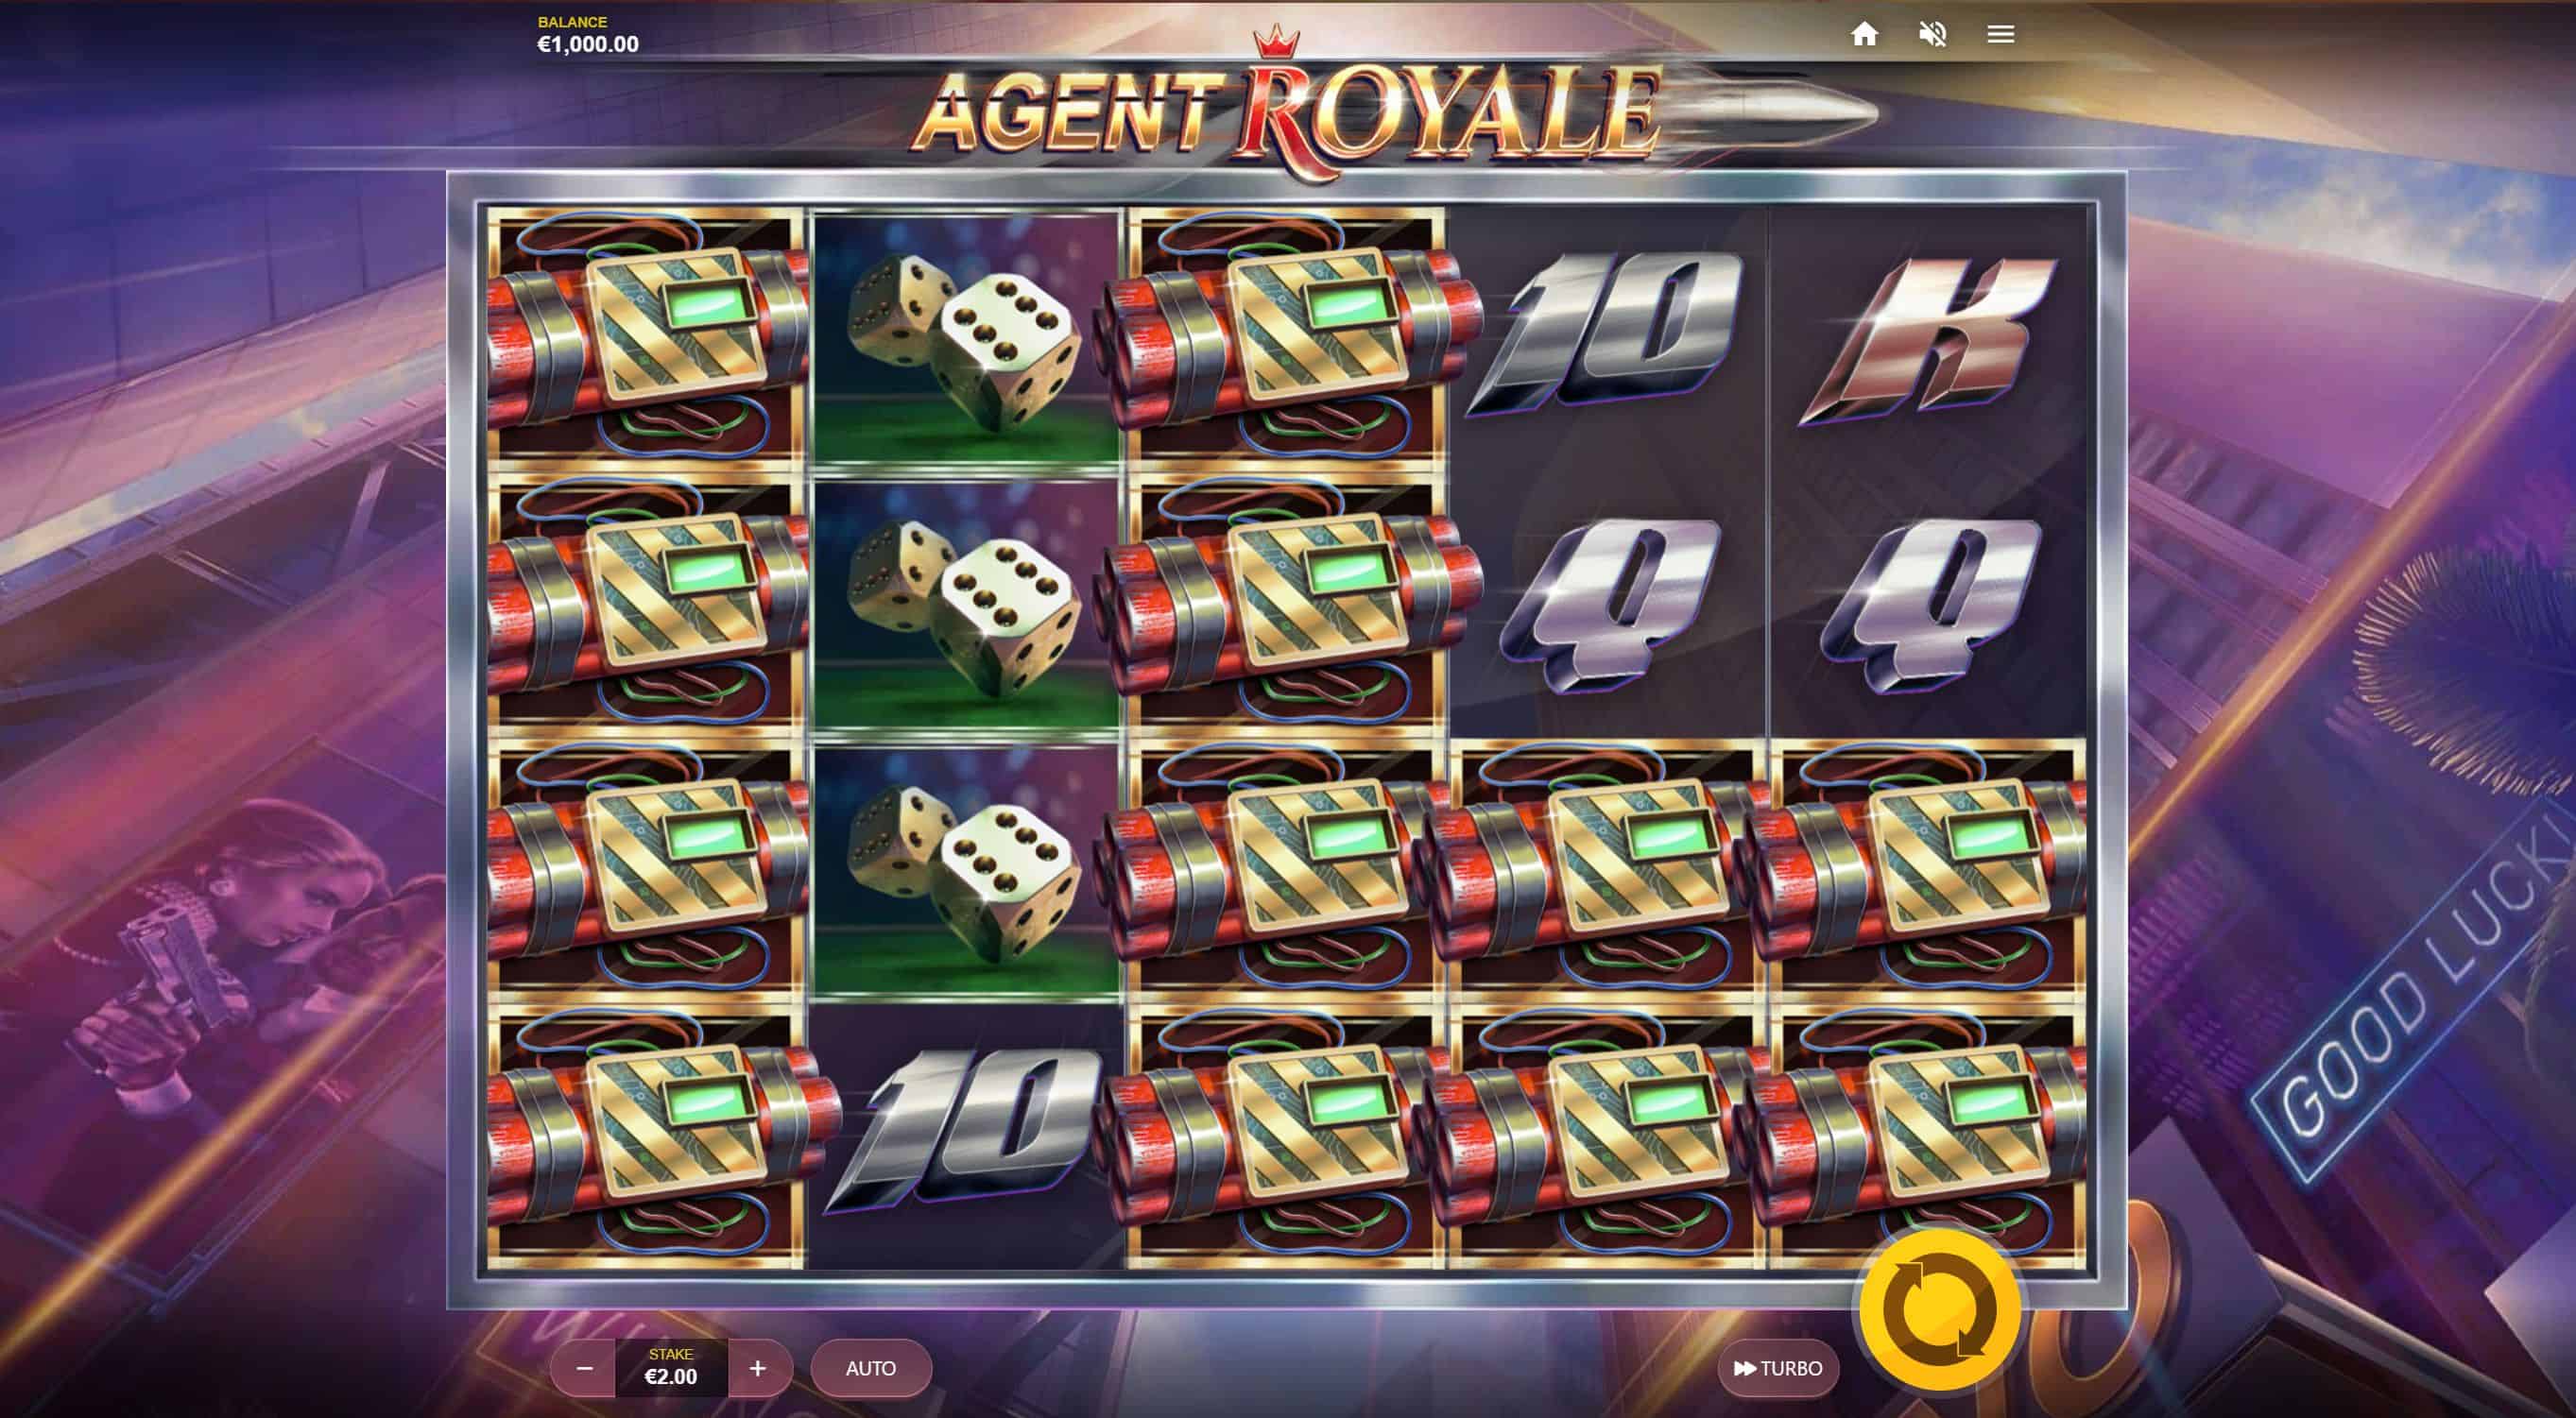 Agent Royale Slot Game Free Play at Casino Ireland 01